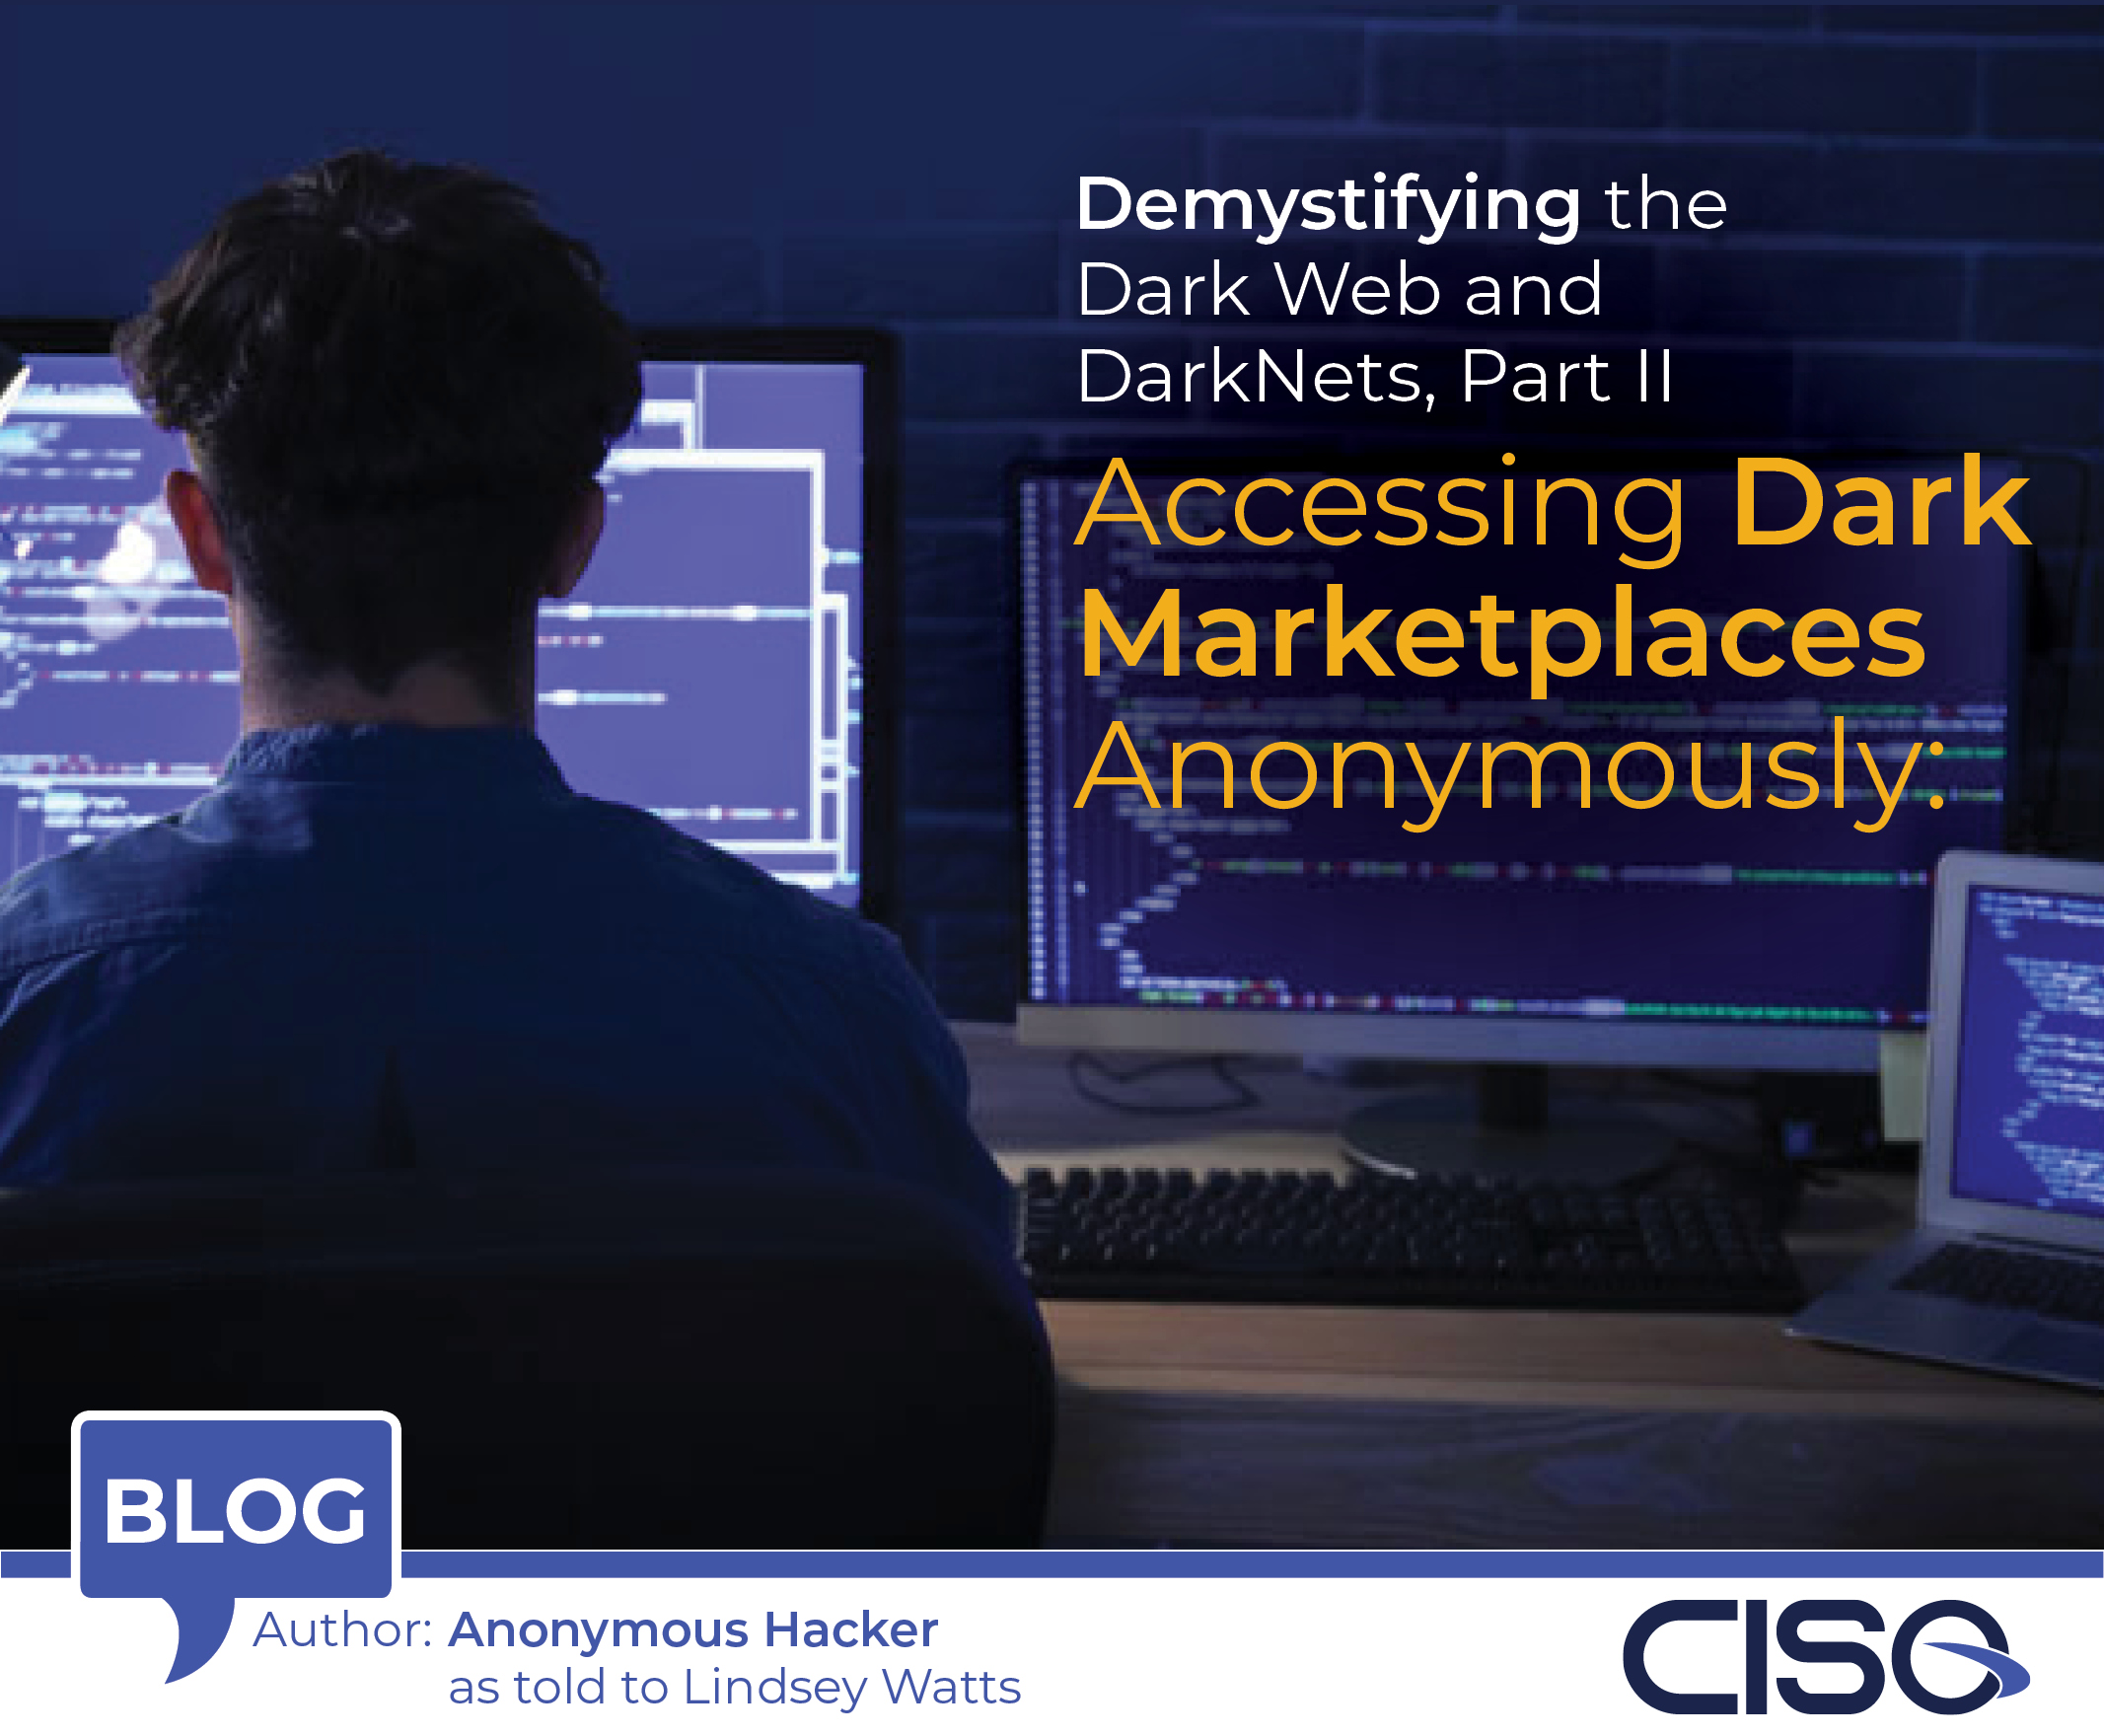 Accessing Dark Marketplaces Anonymously: Demystifying the Dark Web and DarkNets, Part II